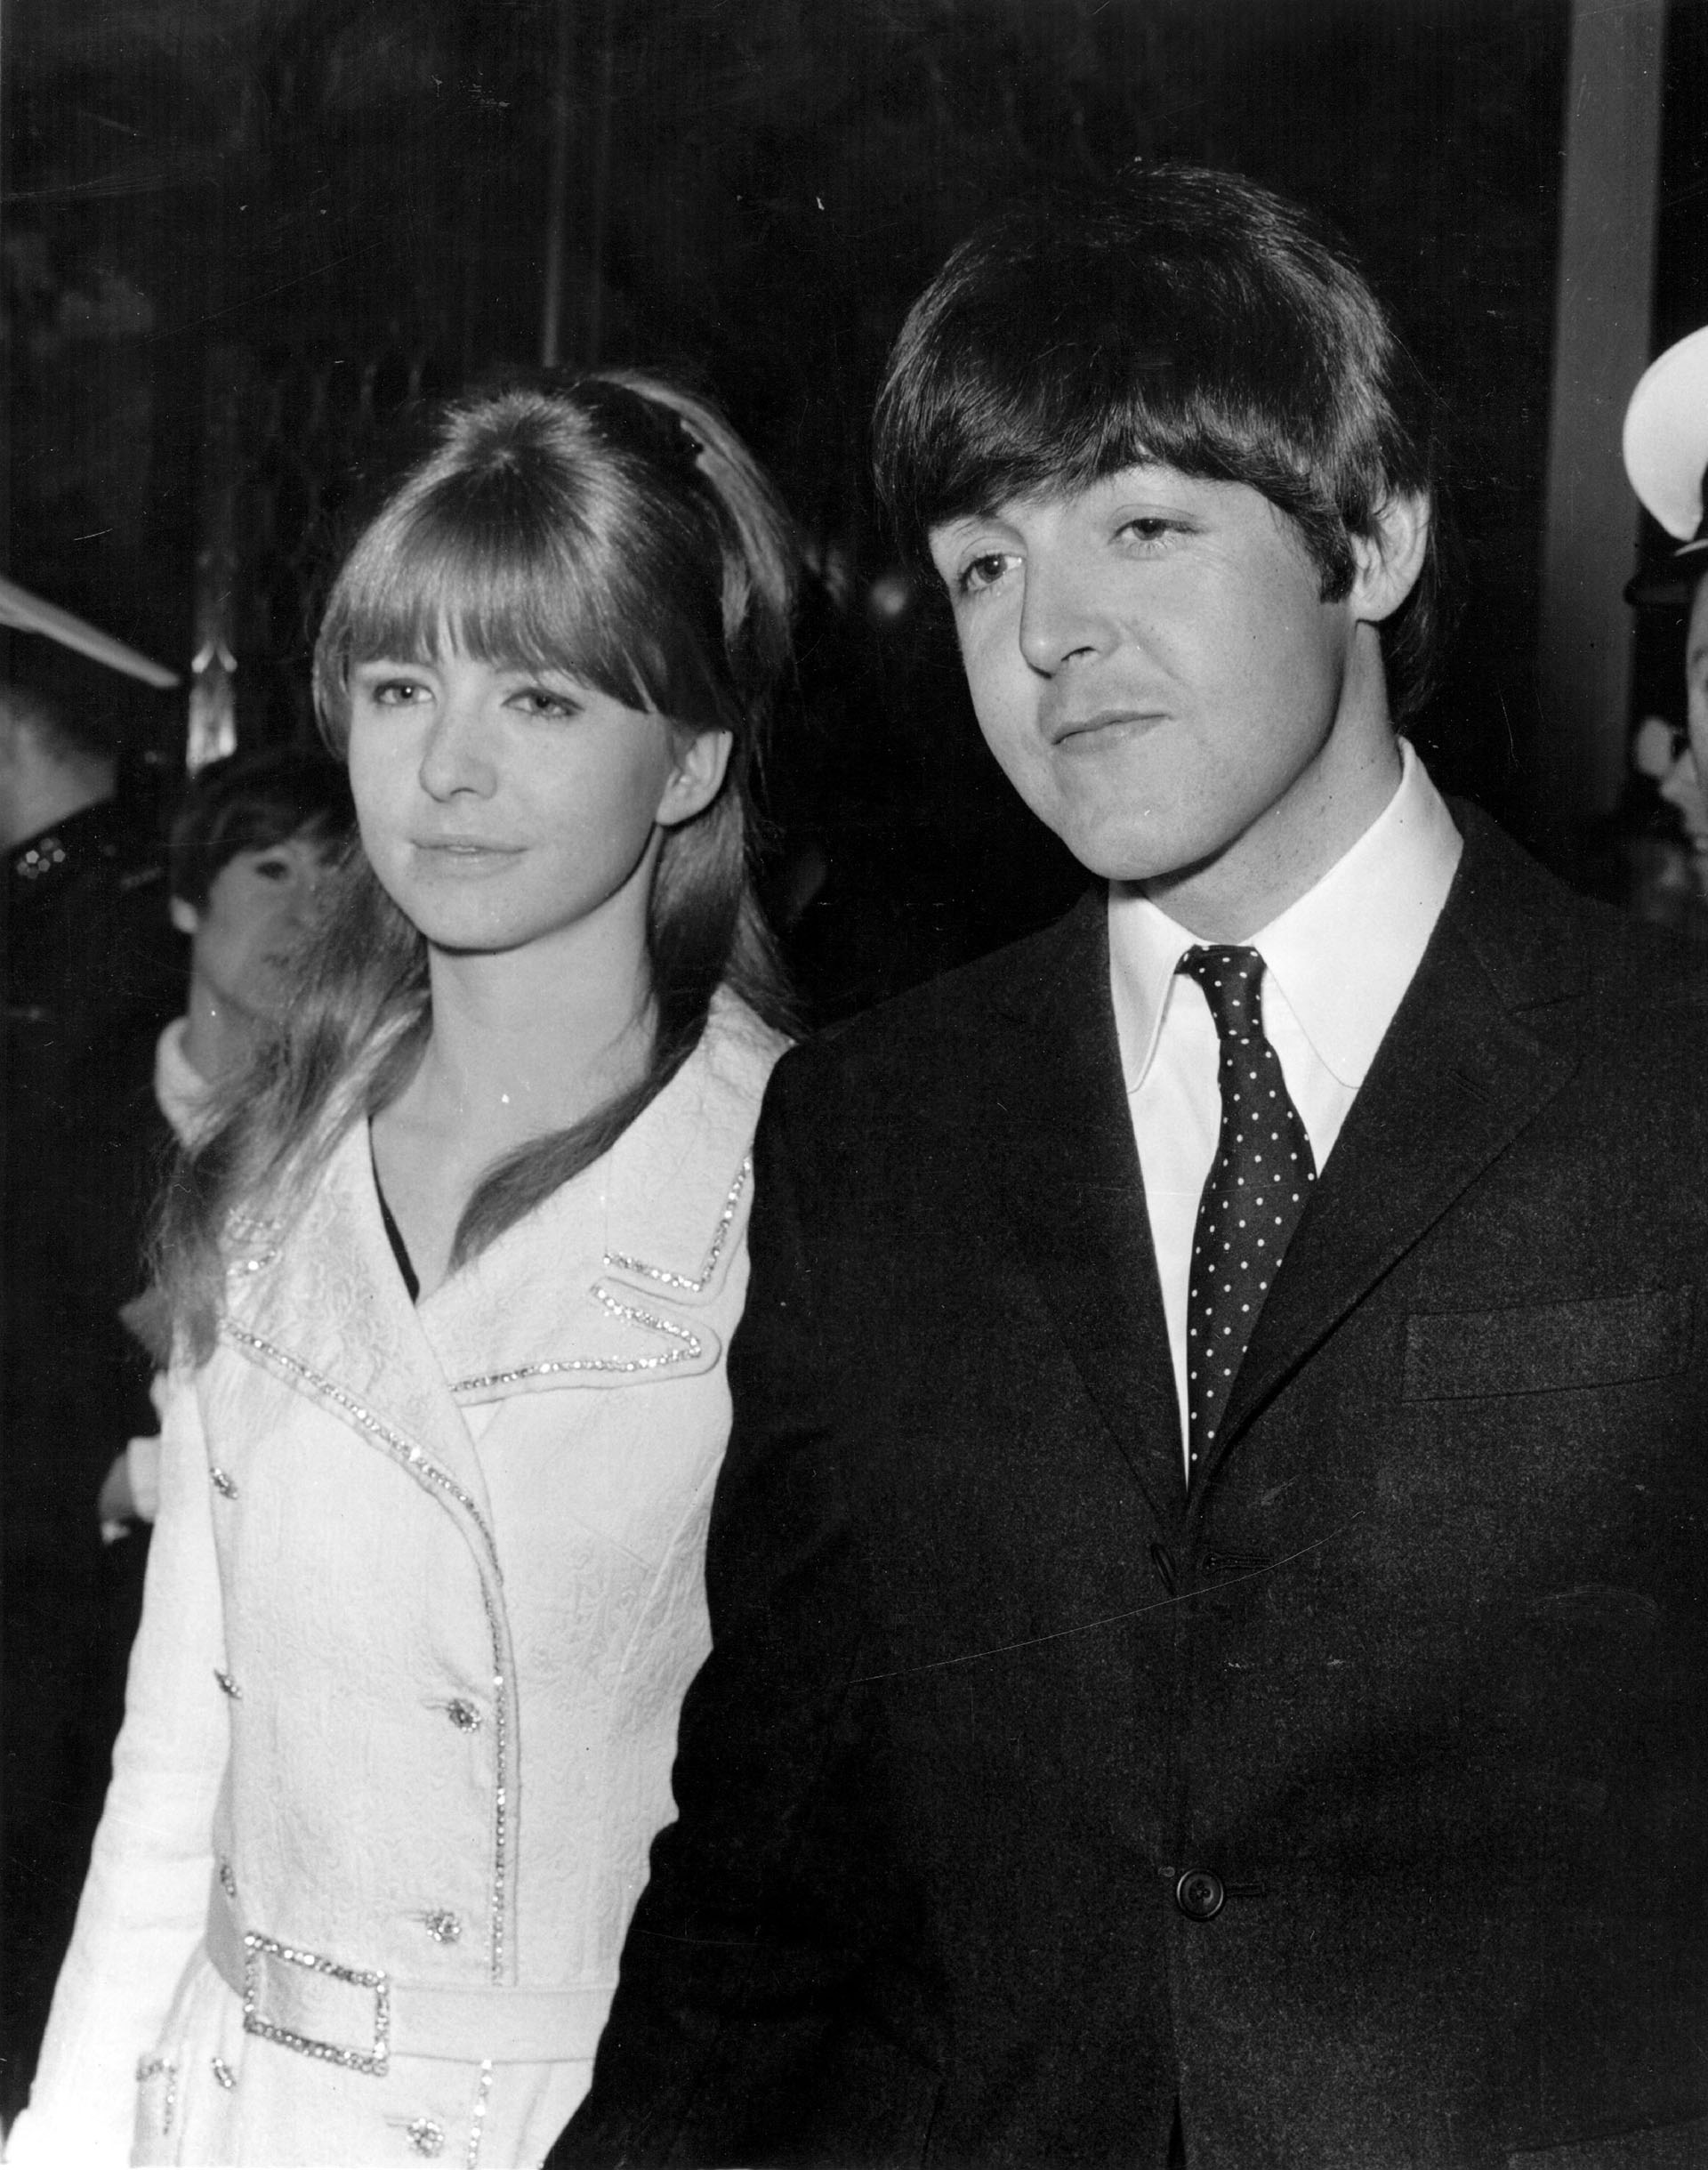 25th March 1966: Paul McCartney, singer and bass player with The Beatles arrives with his girlfriend, actress Jane Asher, at the premiere of Michael Caine's new film 'Alfie' at the Plaza Theatre, London. (Photo by Central Press/Getty Images)